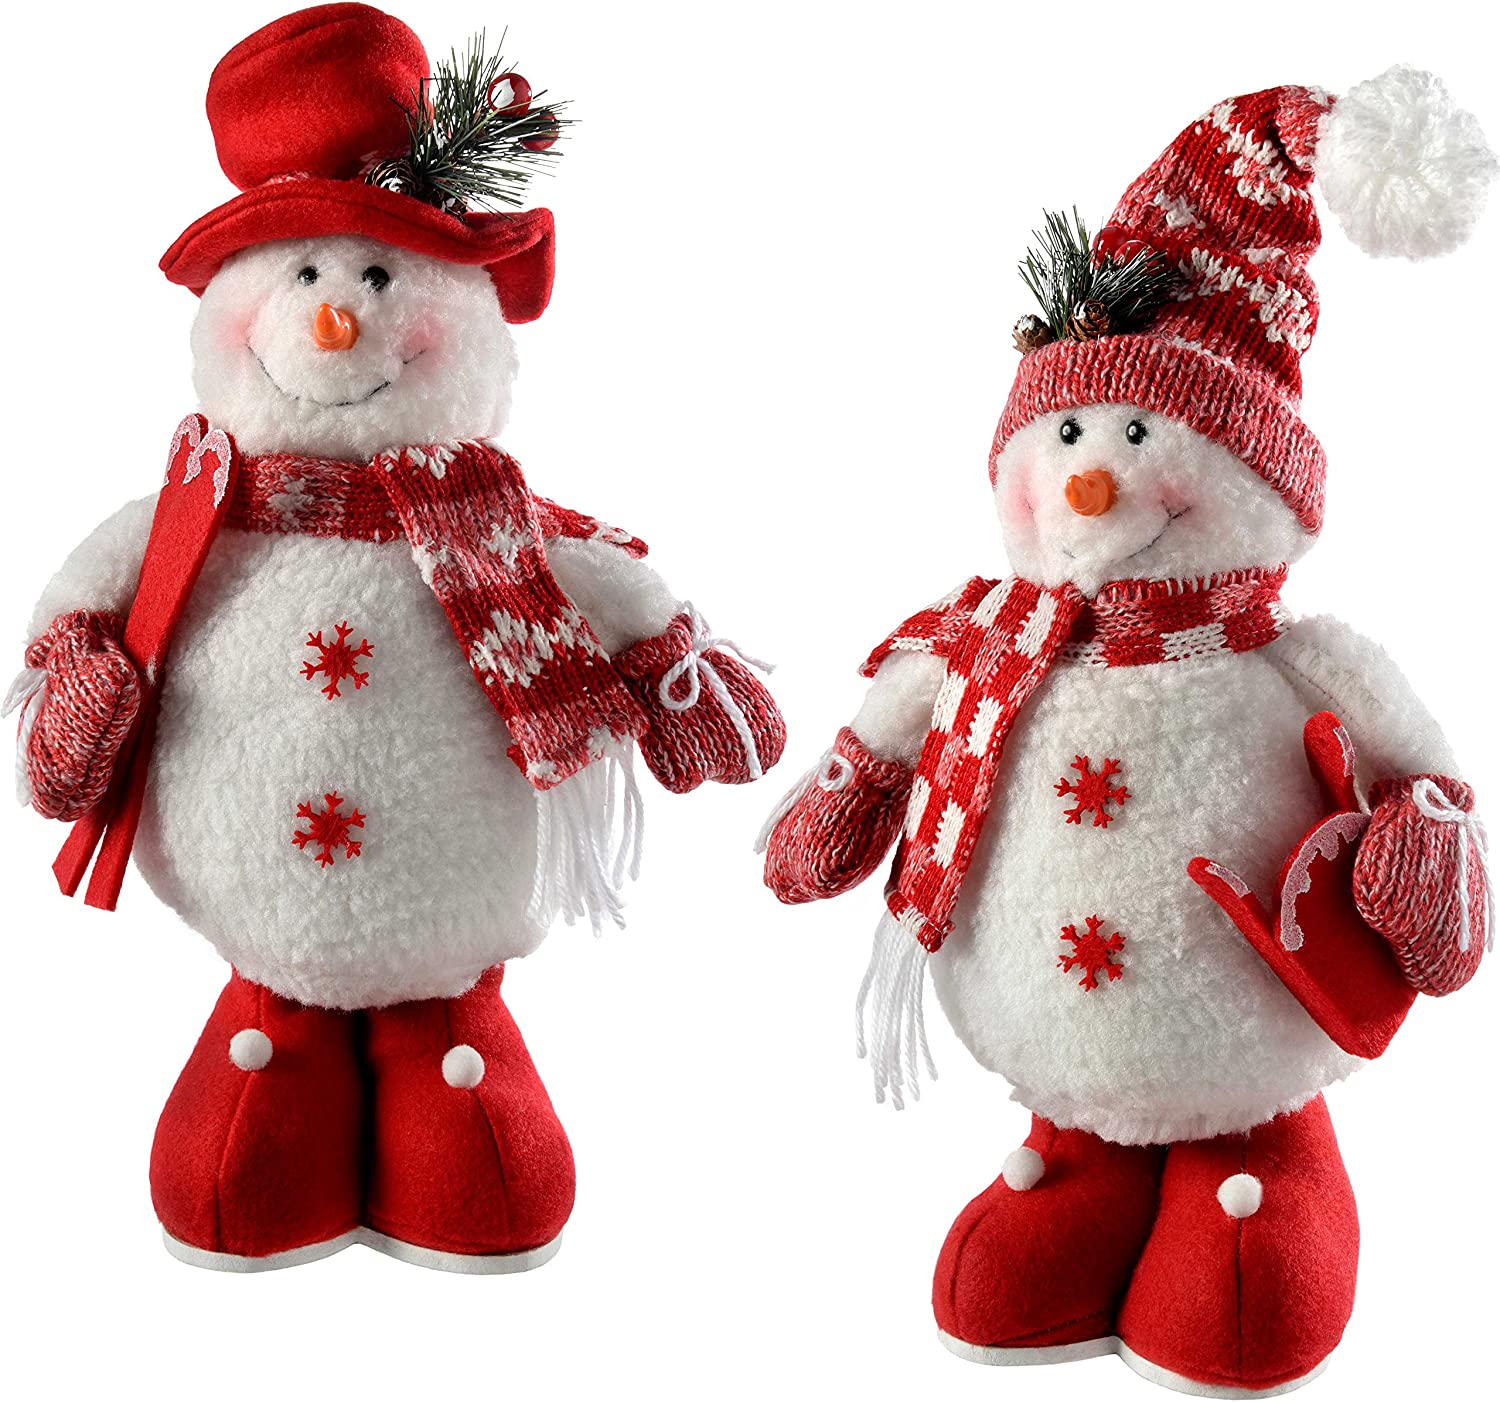 WeRChristmas 33 cm Standing Snowman Christmas Decoration, Set of 2, Red/White